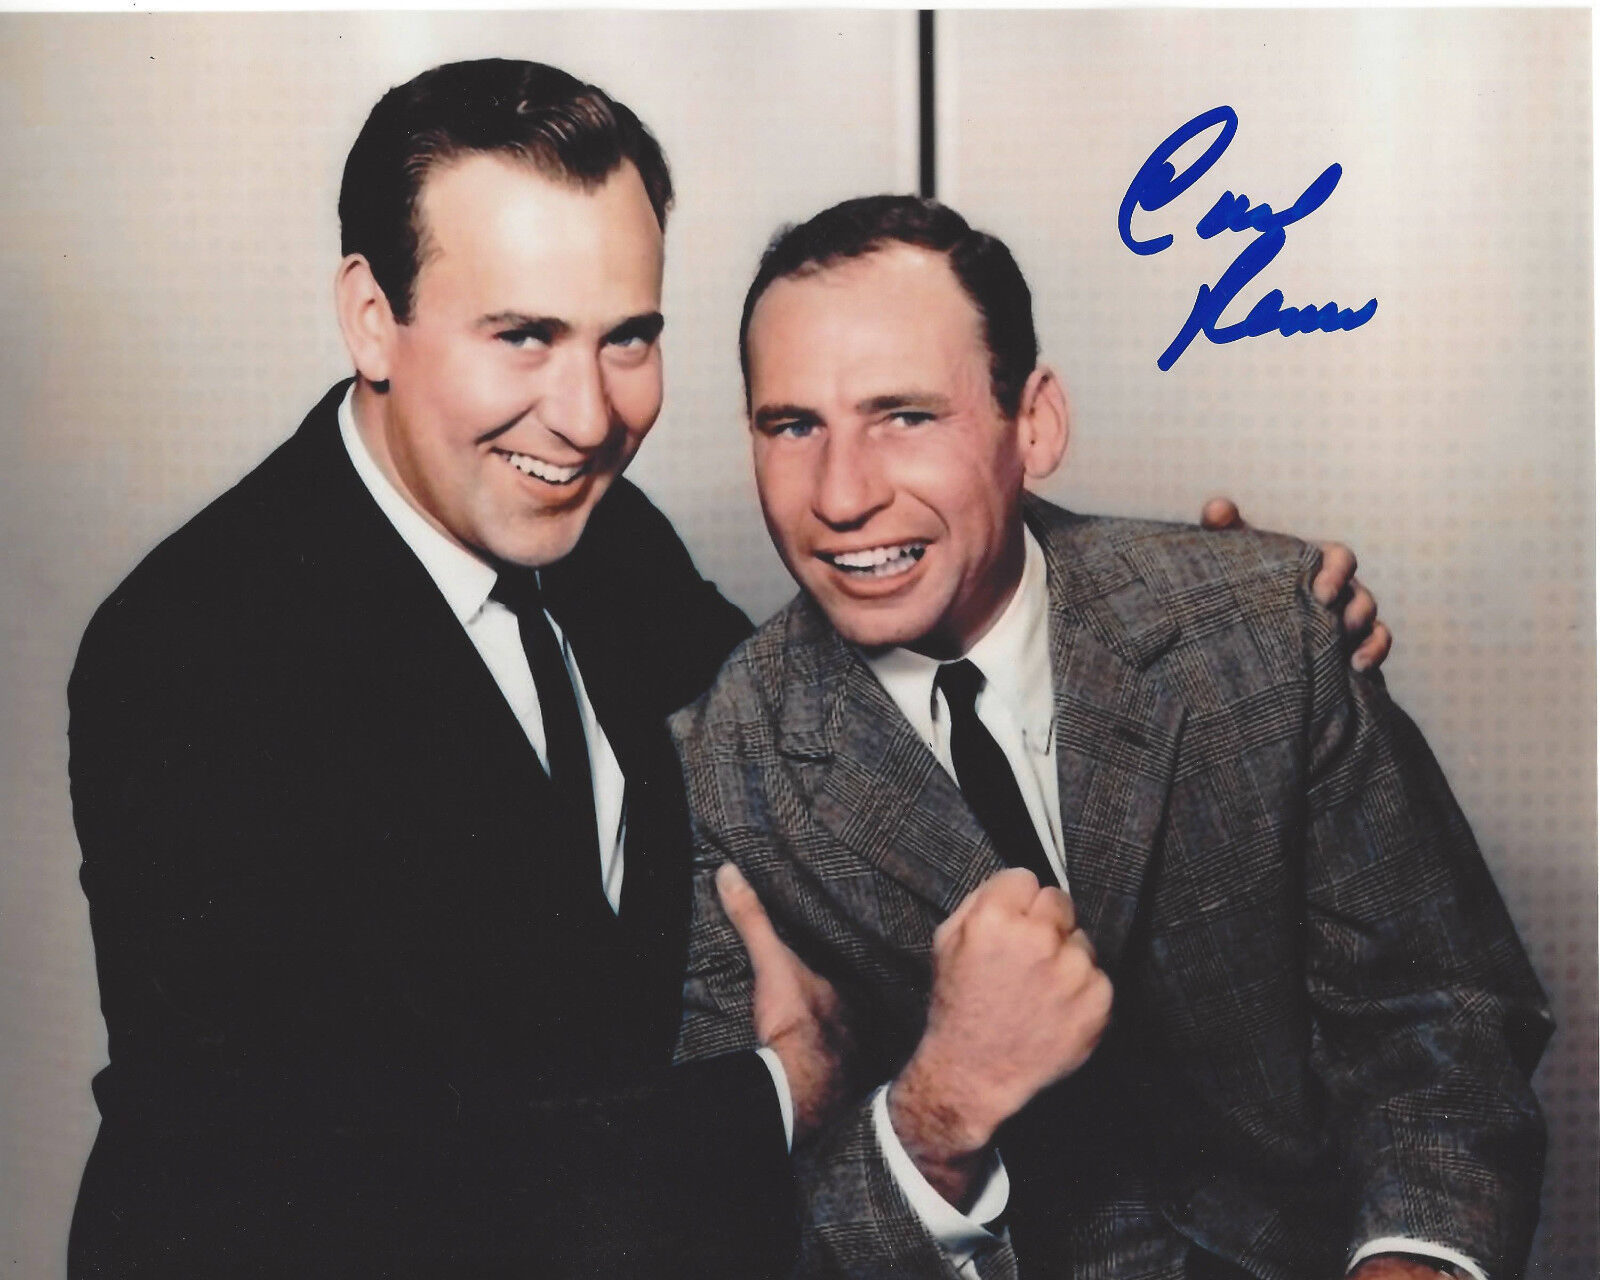 COMEDIAN CARL REINER SIGNED AUTHENTIC MEL BROOKS 8X10 Photo Poster painting w/COA PROOF ACTOR